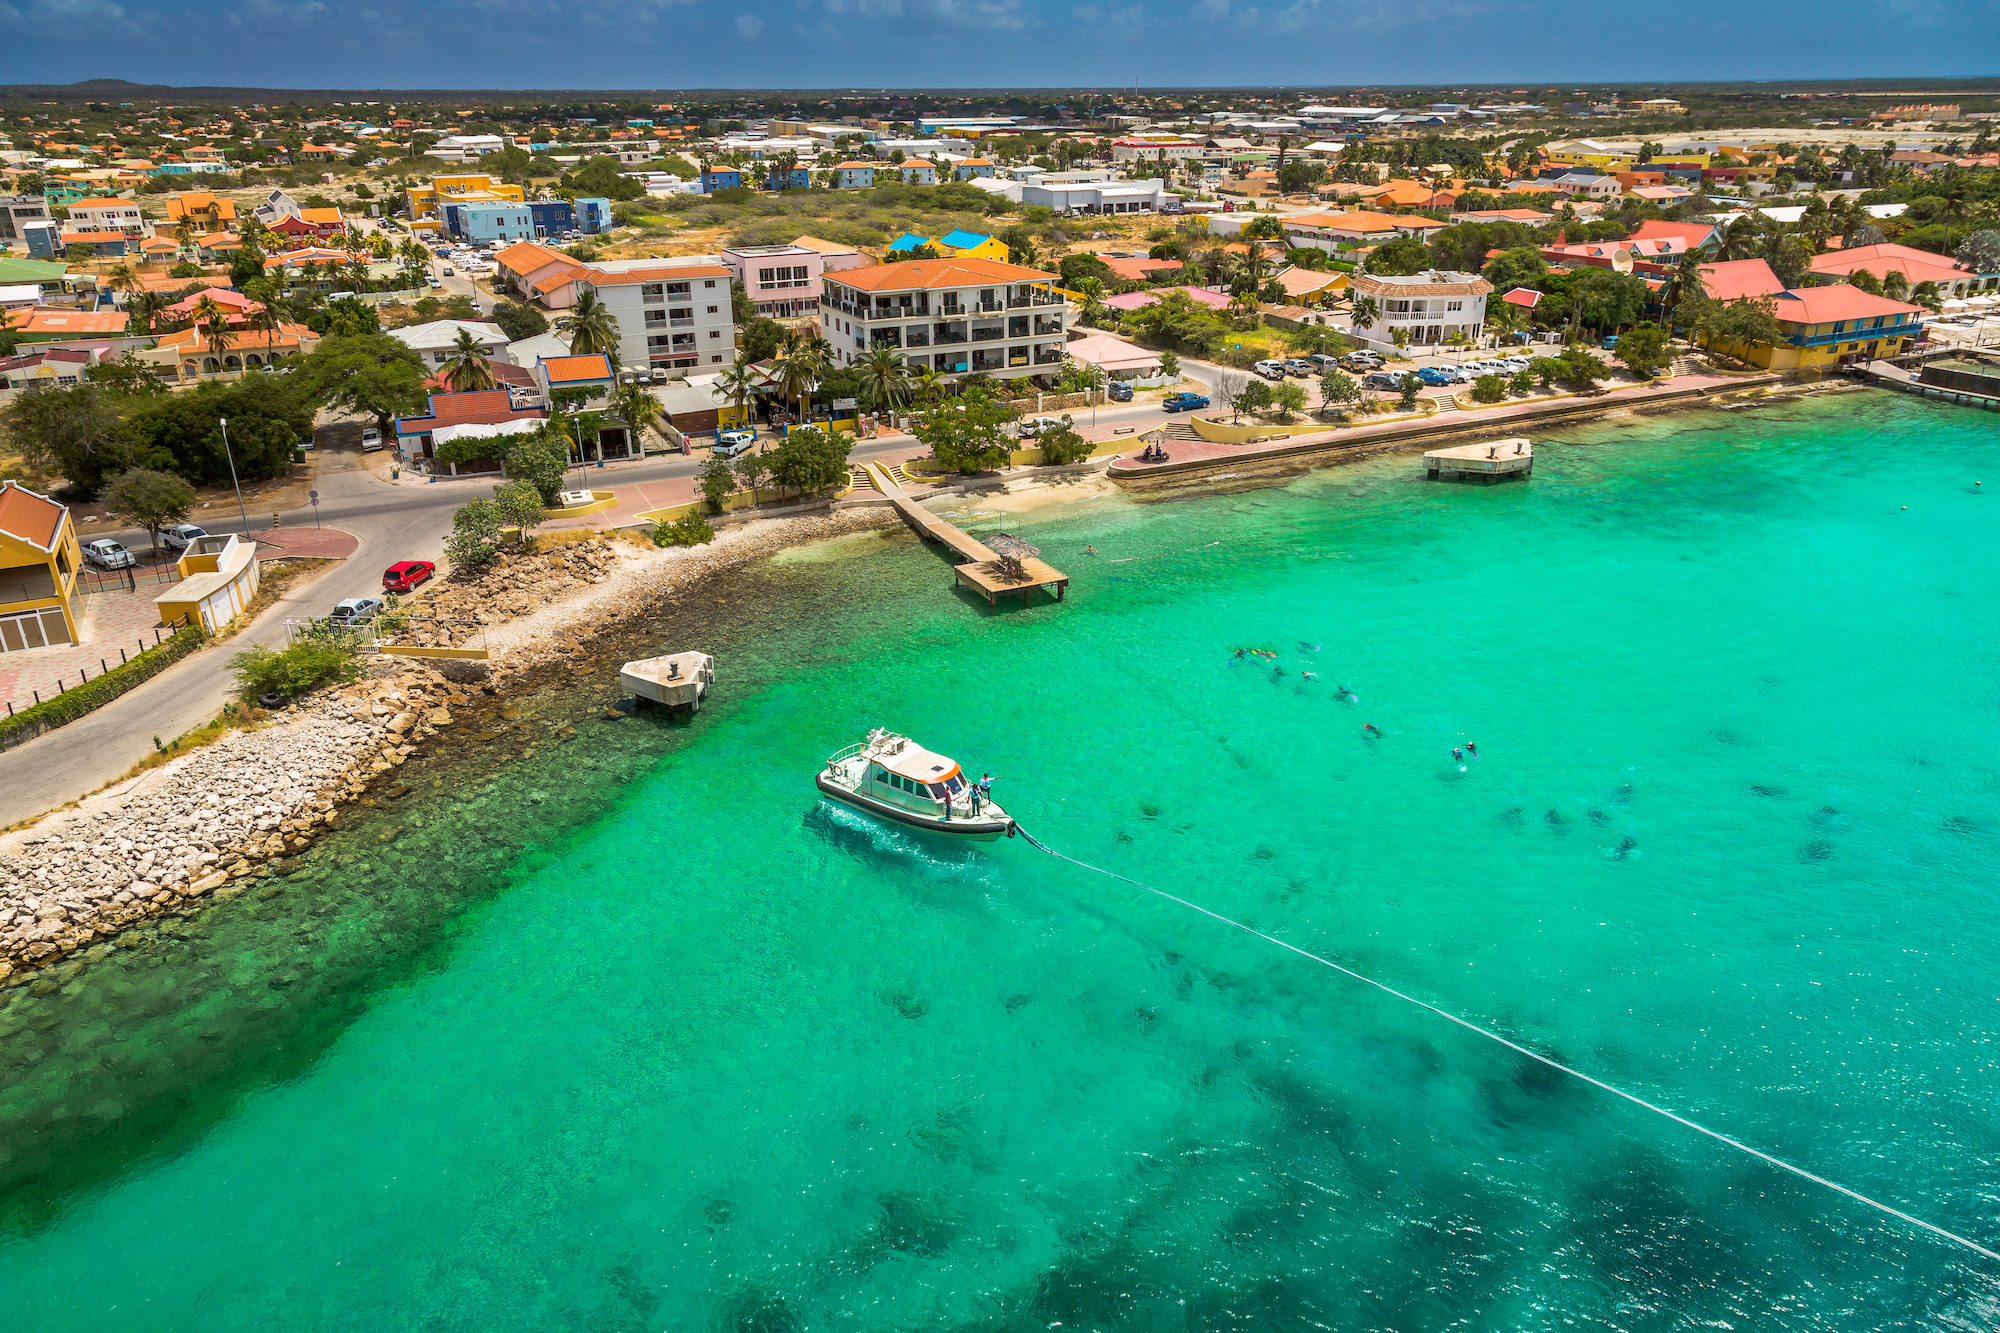 An aerial view of the beach and sea at Bonaire, which many scuba divers consider the best Caribbean island for shore diving